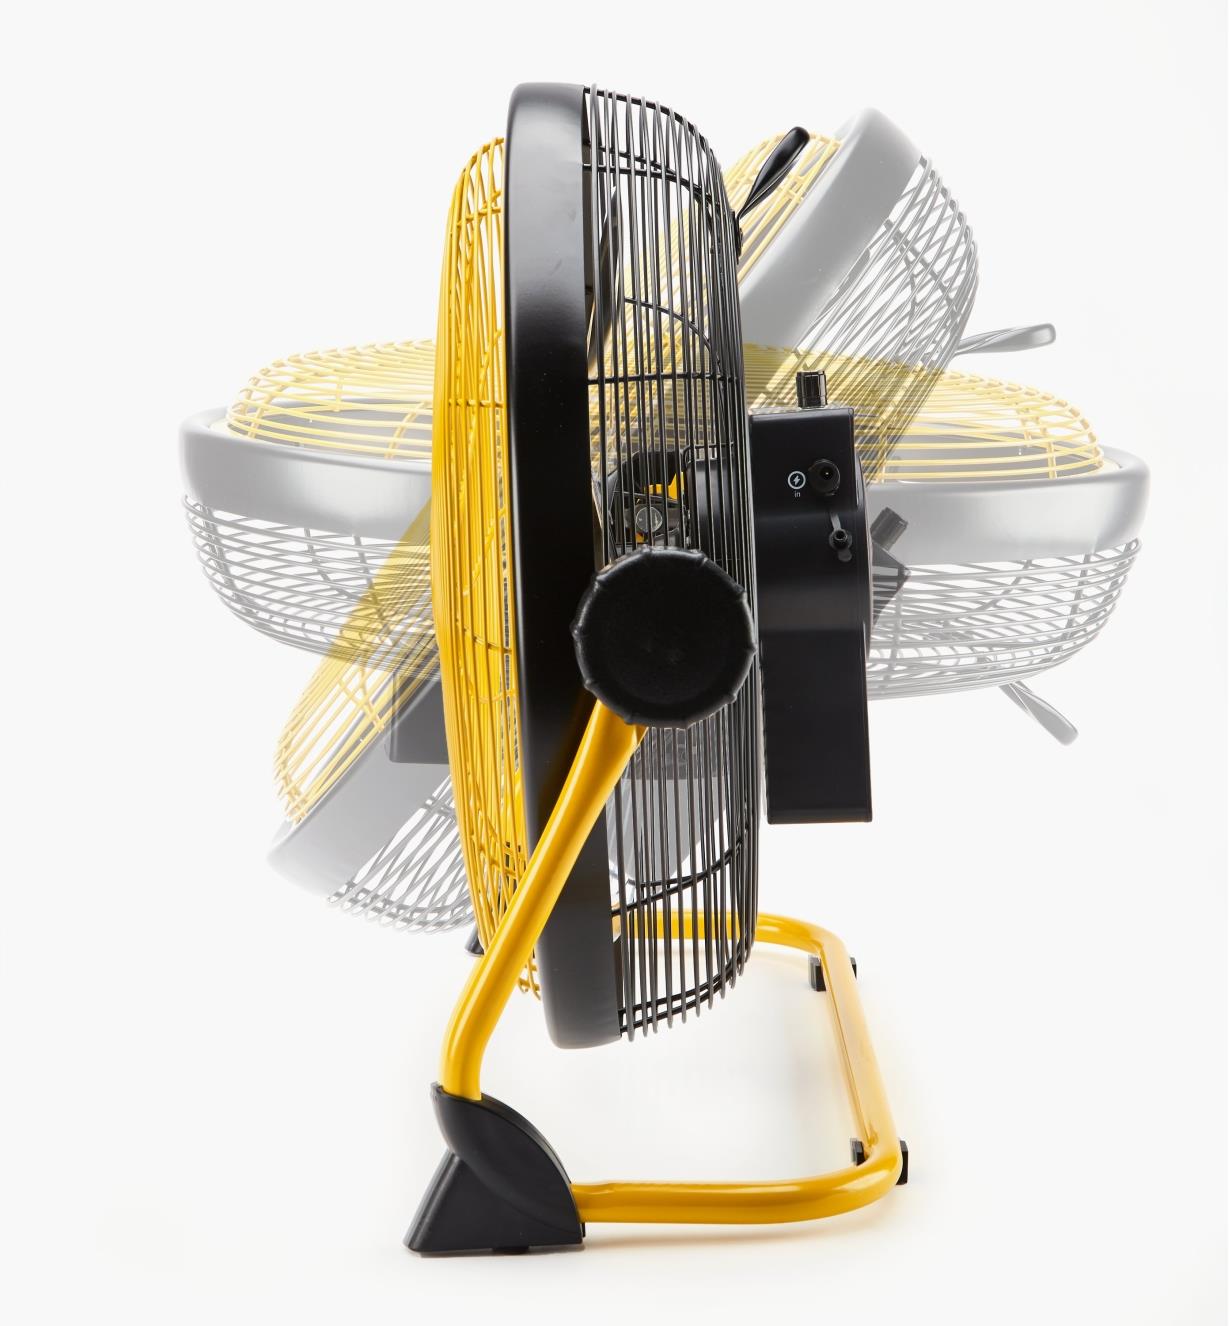 Side view of rechargeable high-velocity fan showing range of angle adjustment